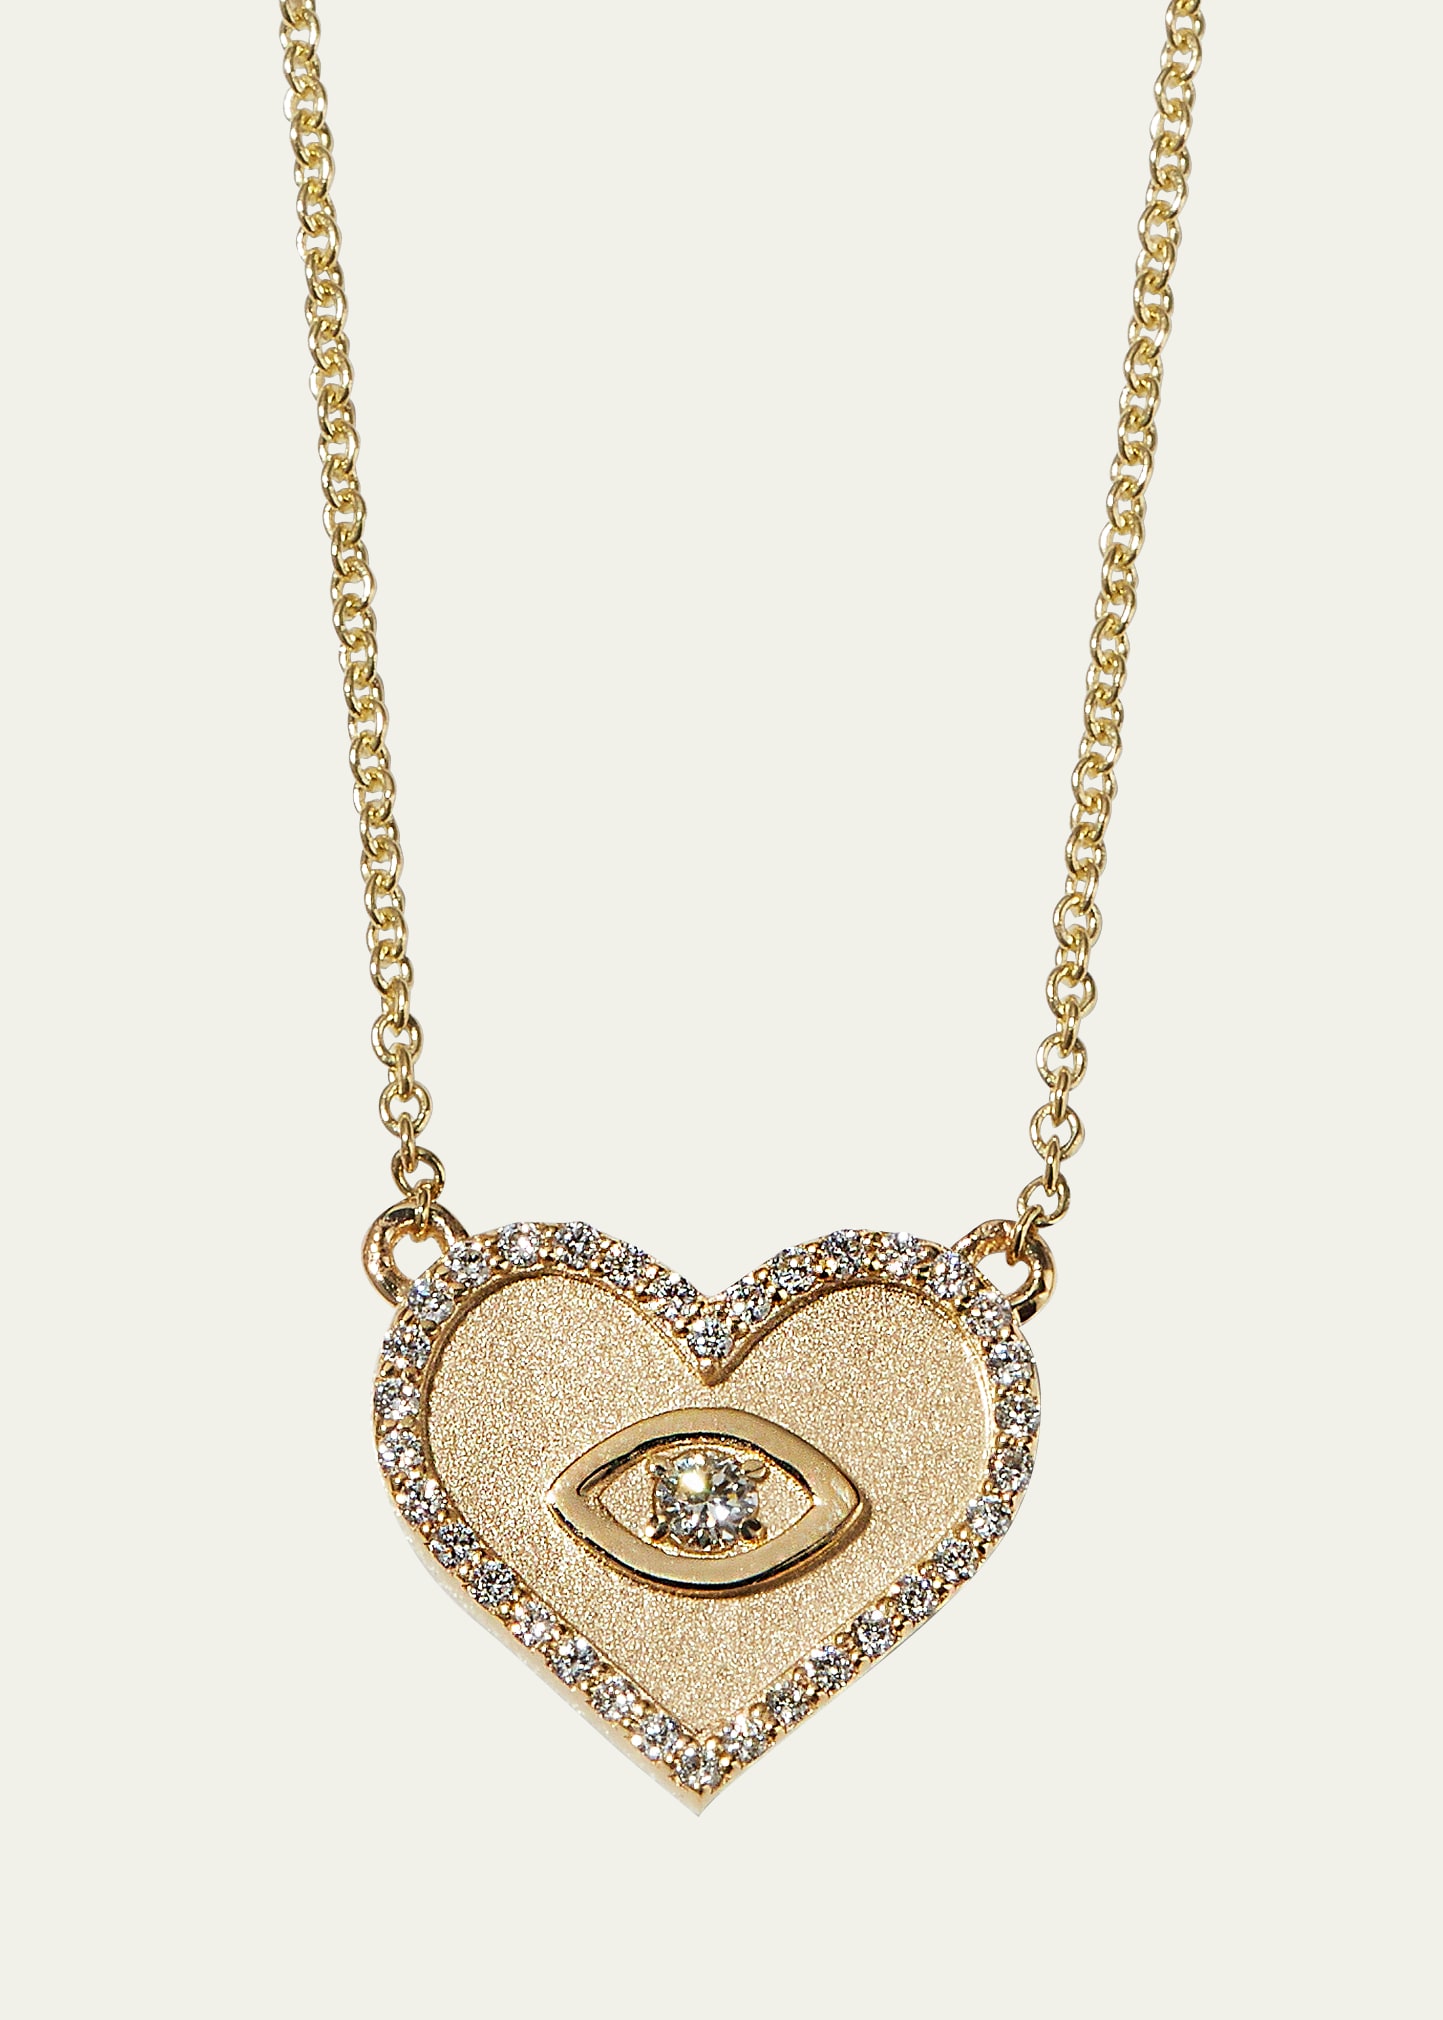 SYDNEY EVAN YELLOW GOLD SMALL HEART NECKLACE WITH MARQUISE EYE